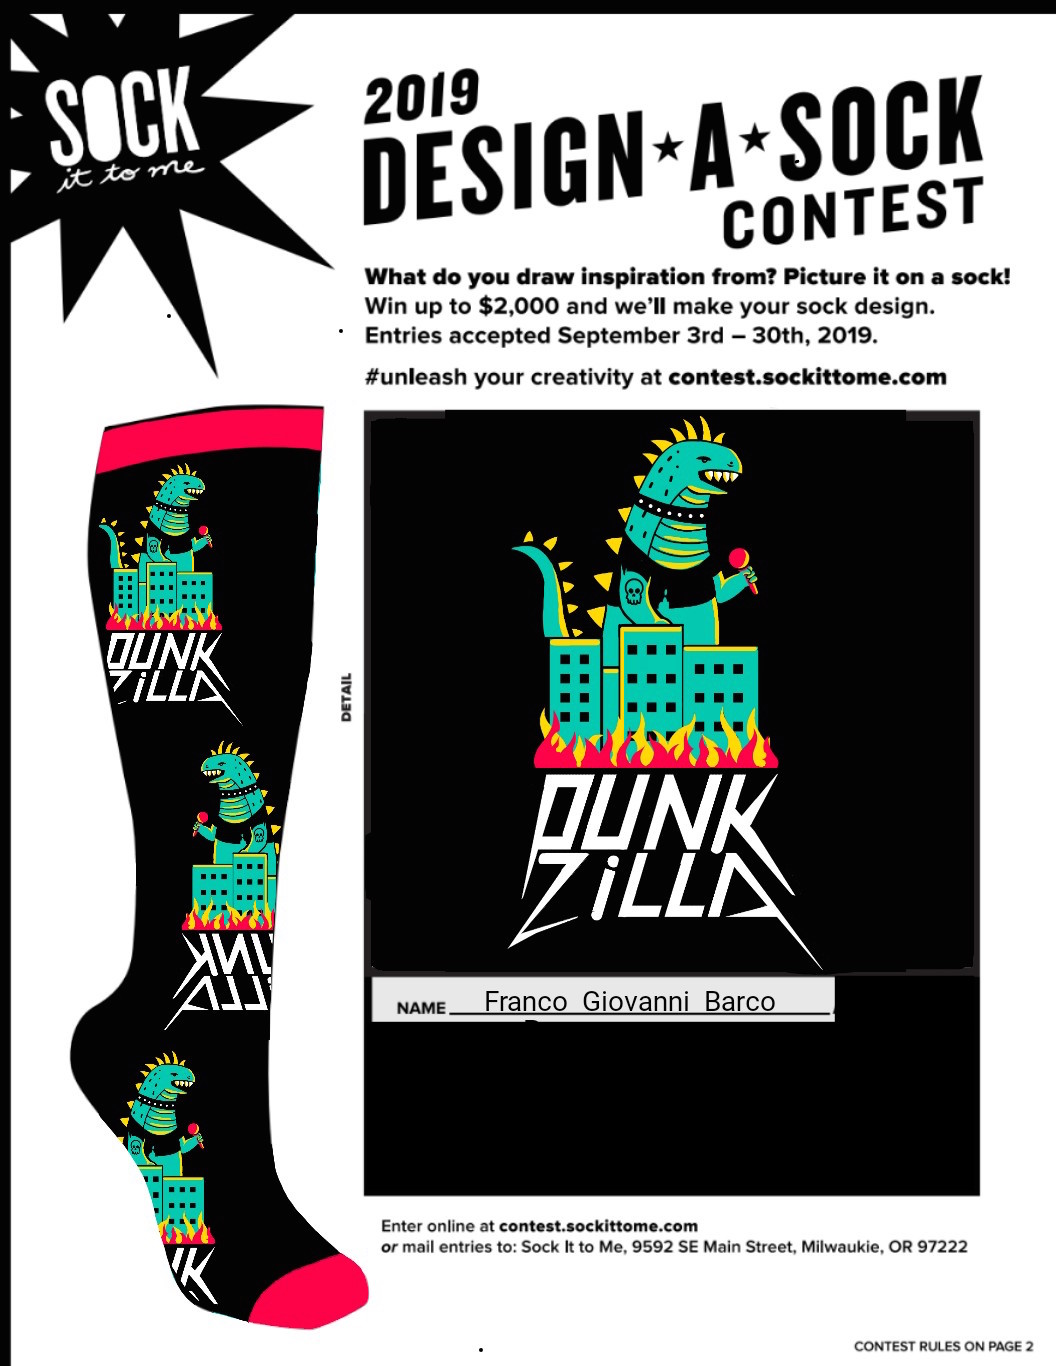 Punkzilla coming to a sock (and city) near you